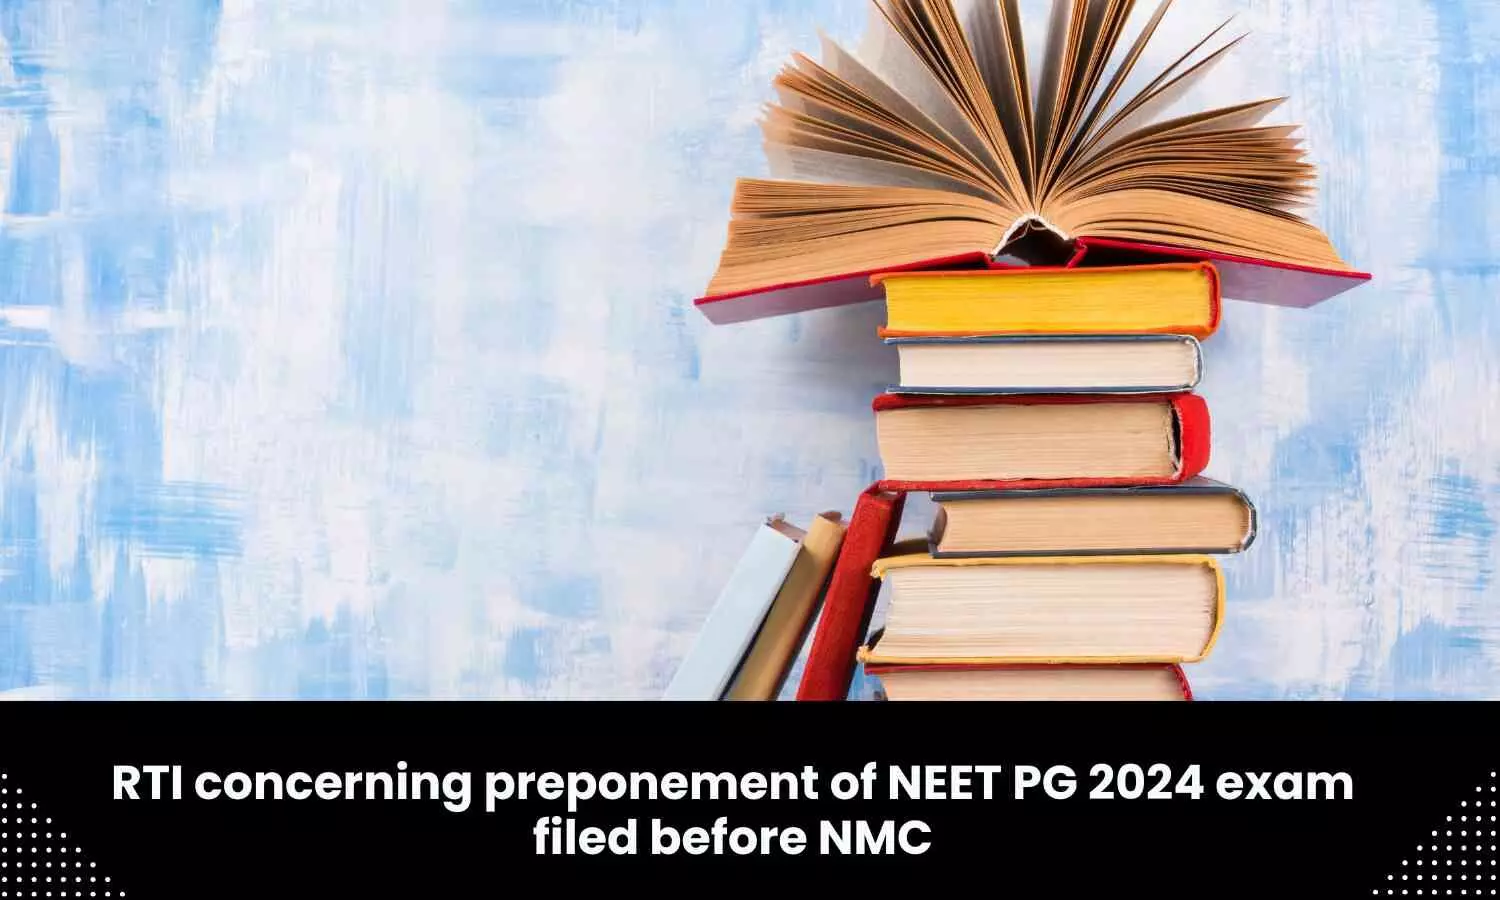 RTI concerning preponement of NEET PG 2024 exam filed before NMC